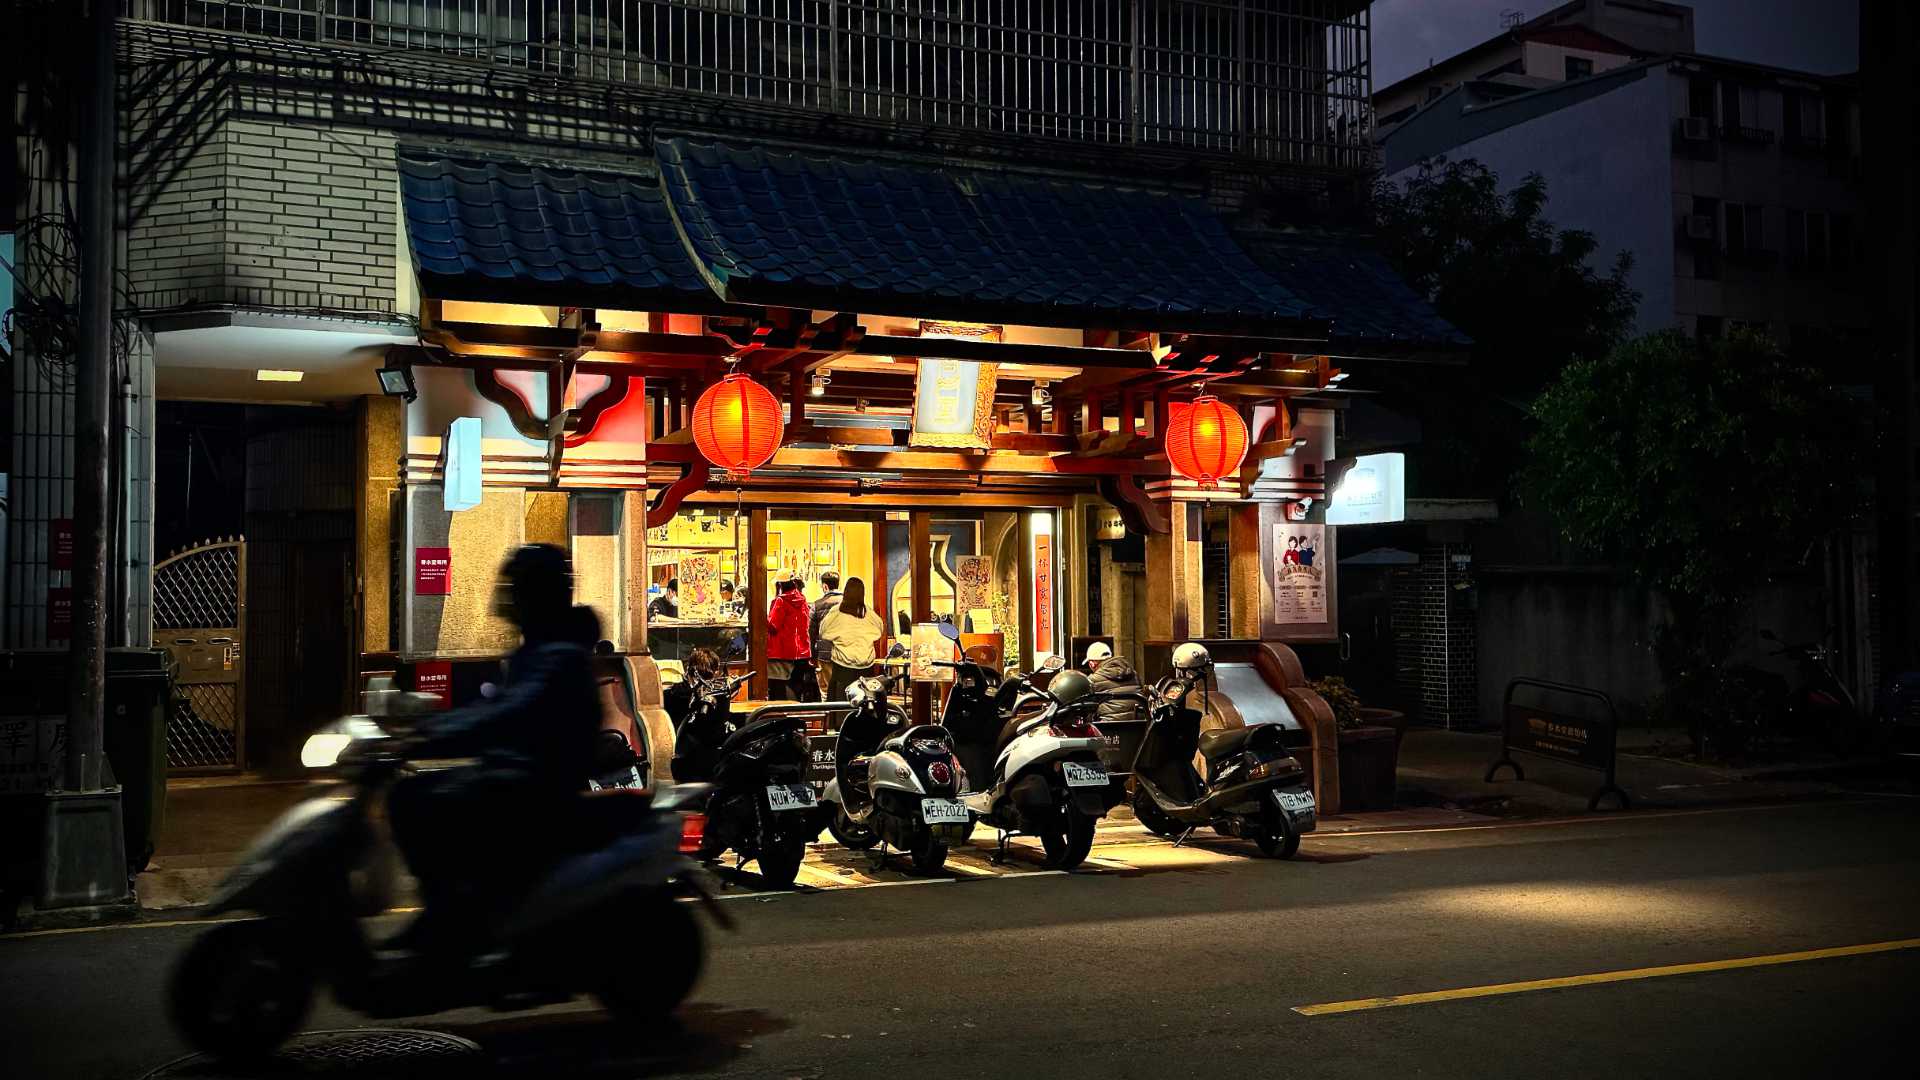 Exterior of the famous Chun Shui Tang teahouse. It's nighttime. There are scooters parked in a row outside the shop, which features a tiled roof and red lanterns.